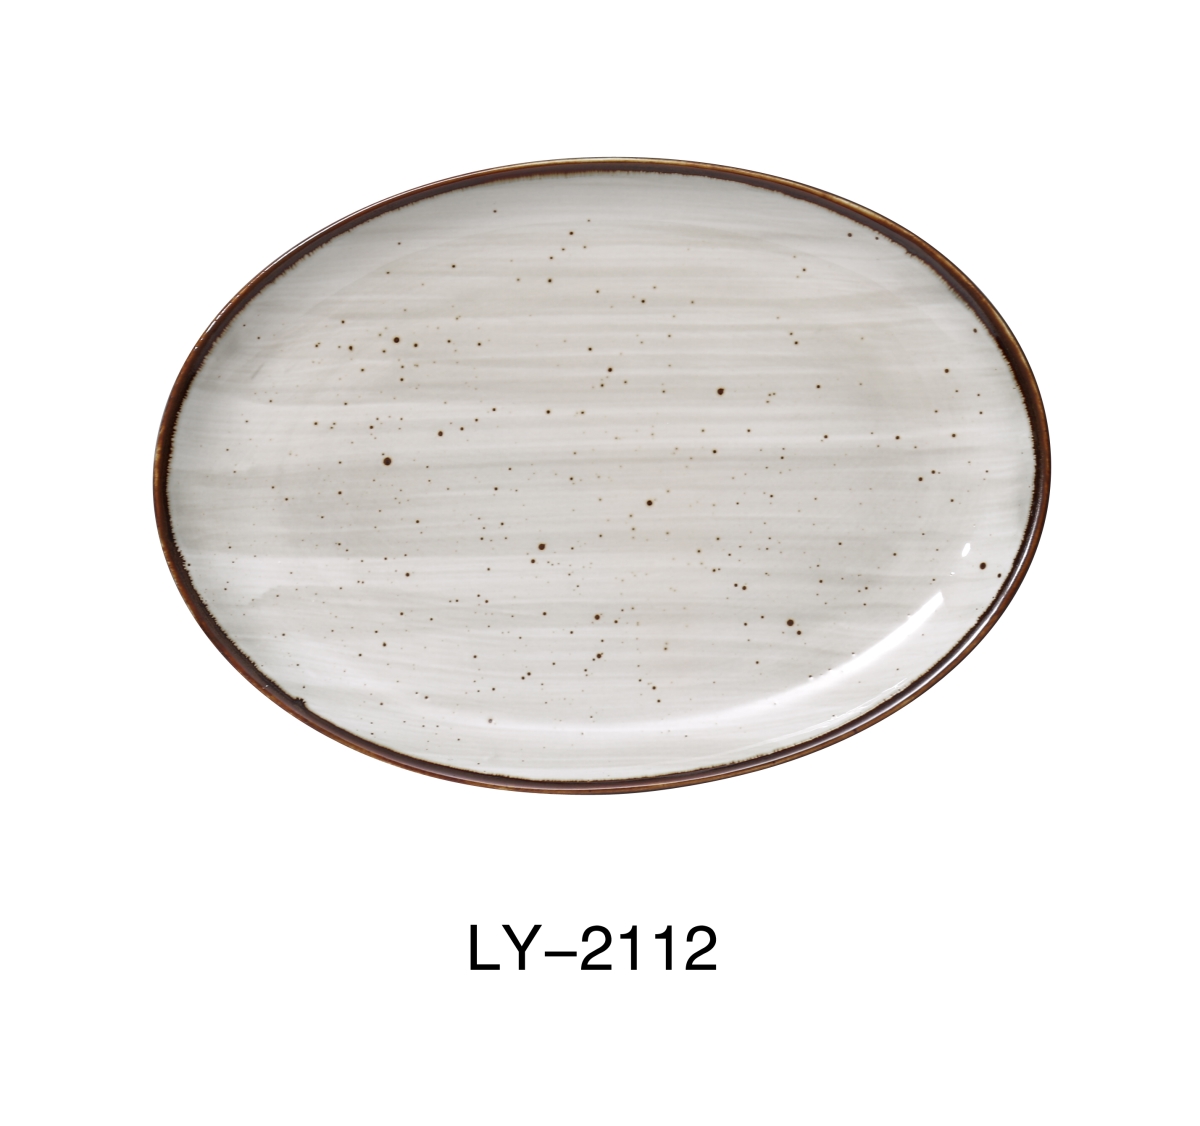 Picture of Yanco LY-2112 Lyon 12 x 8.25 x 1.25 in. Coupe Platter, Reactive Glaze - Pack of 12